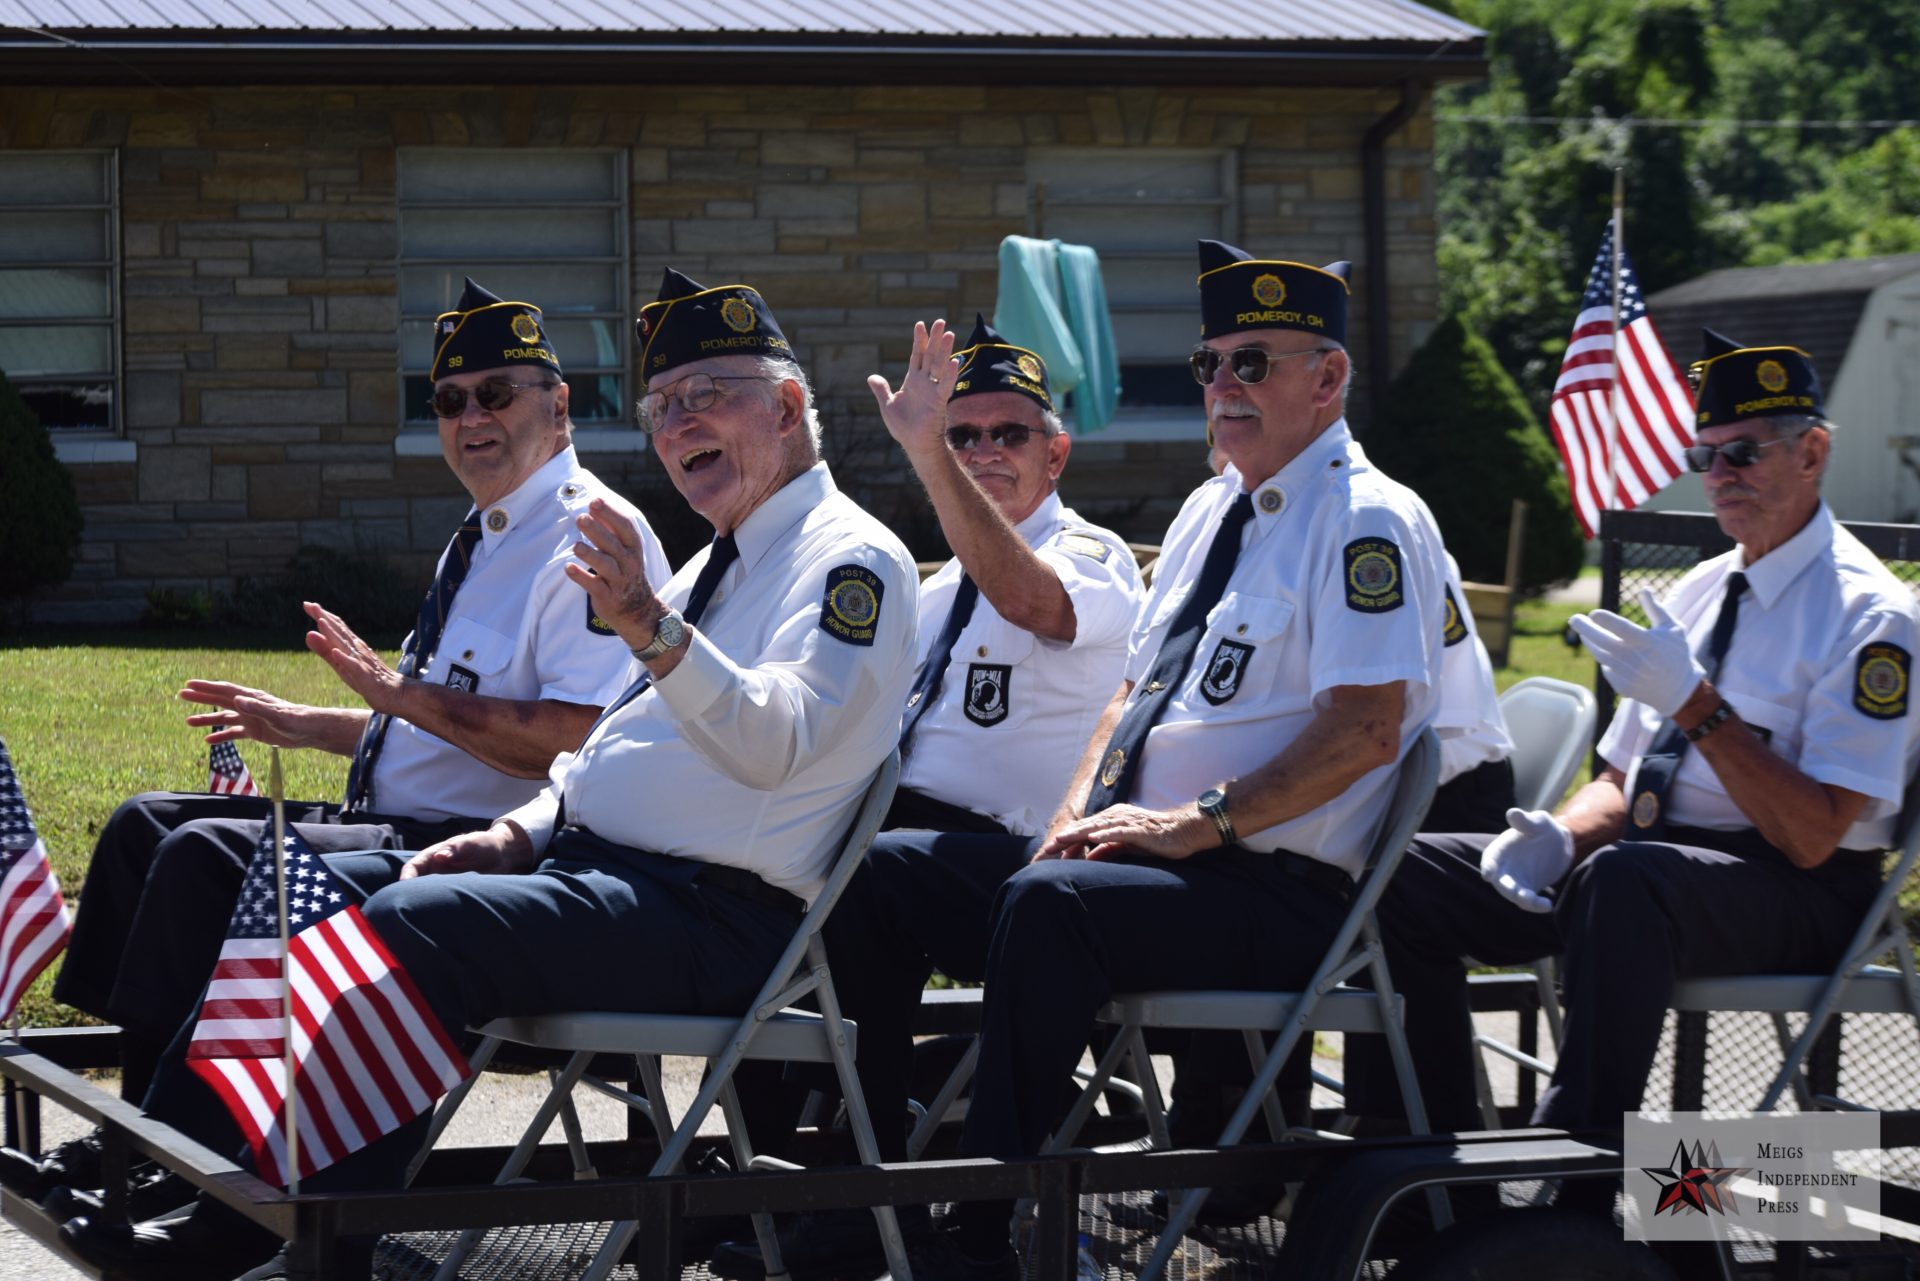 Scenes from the Rutland Fourth of July Parade Meigs Independent Press